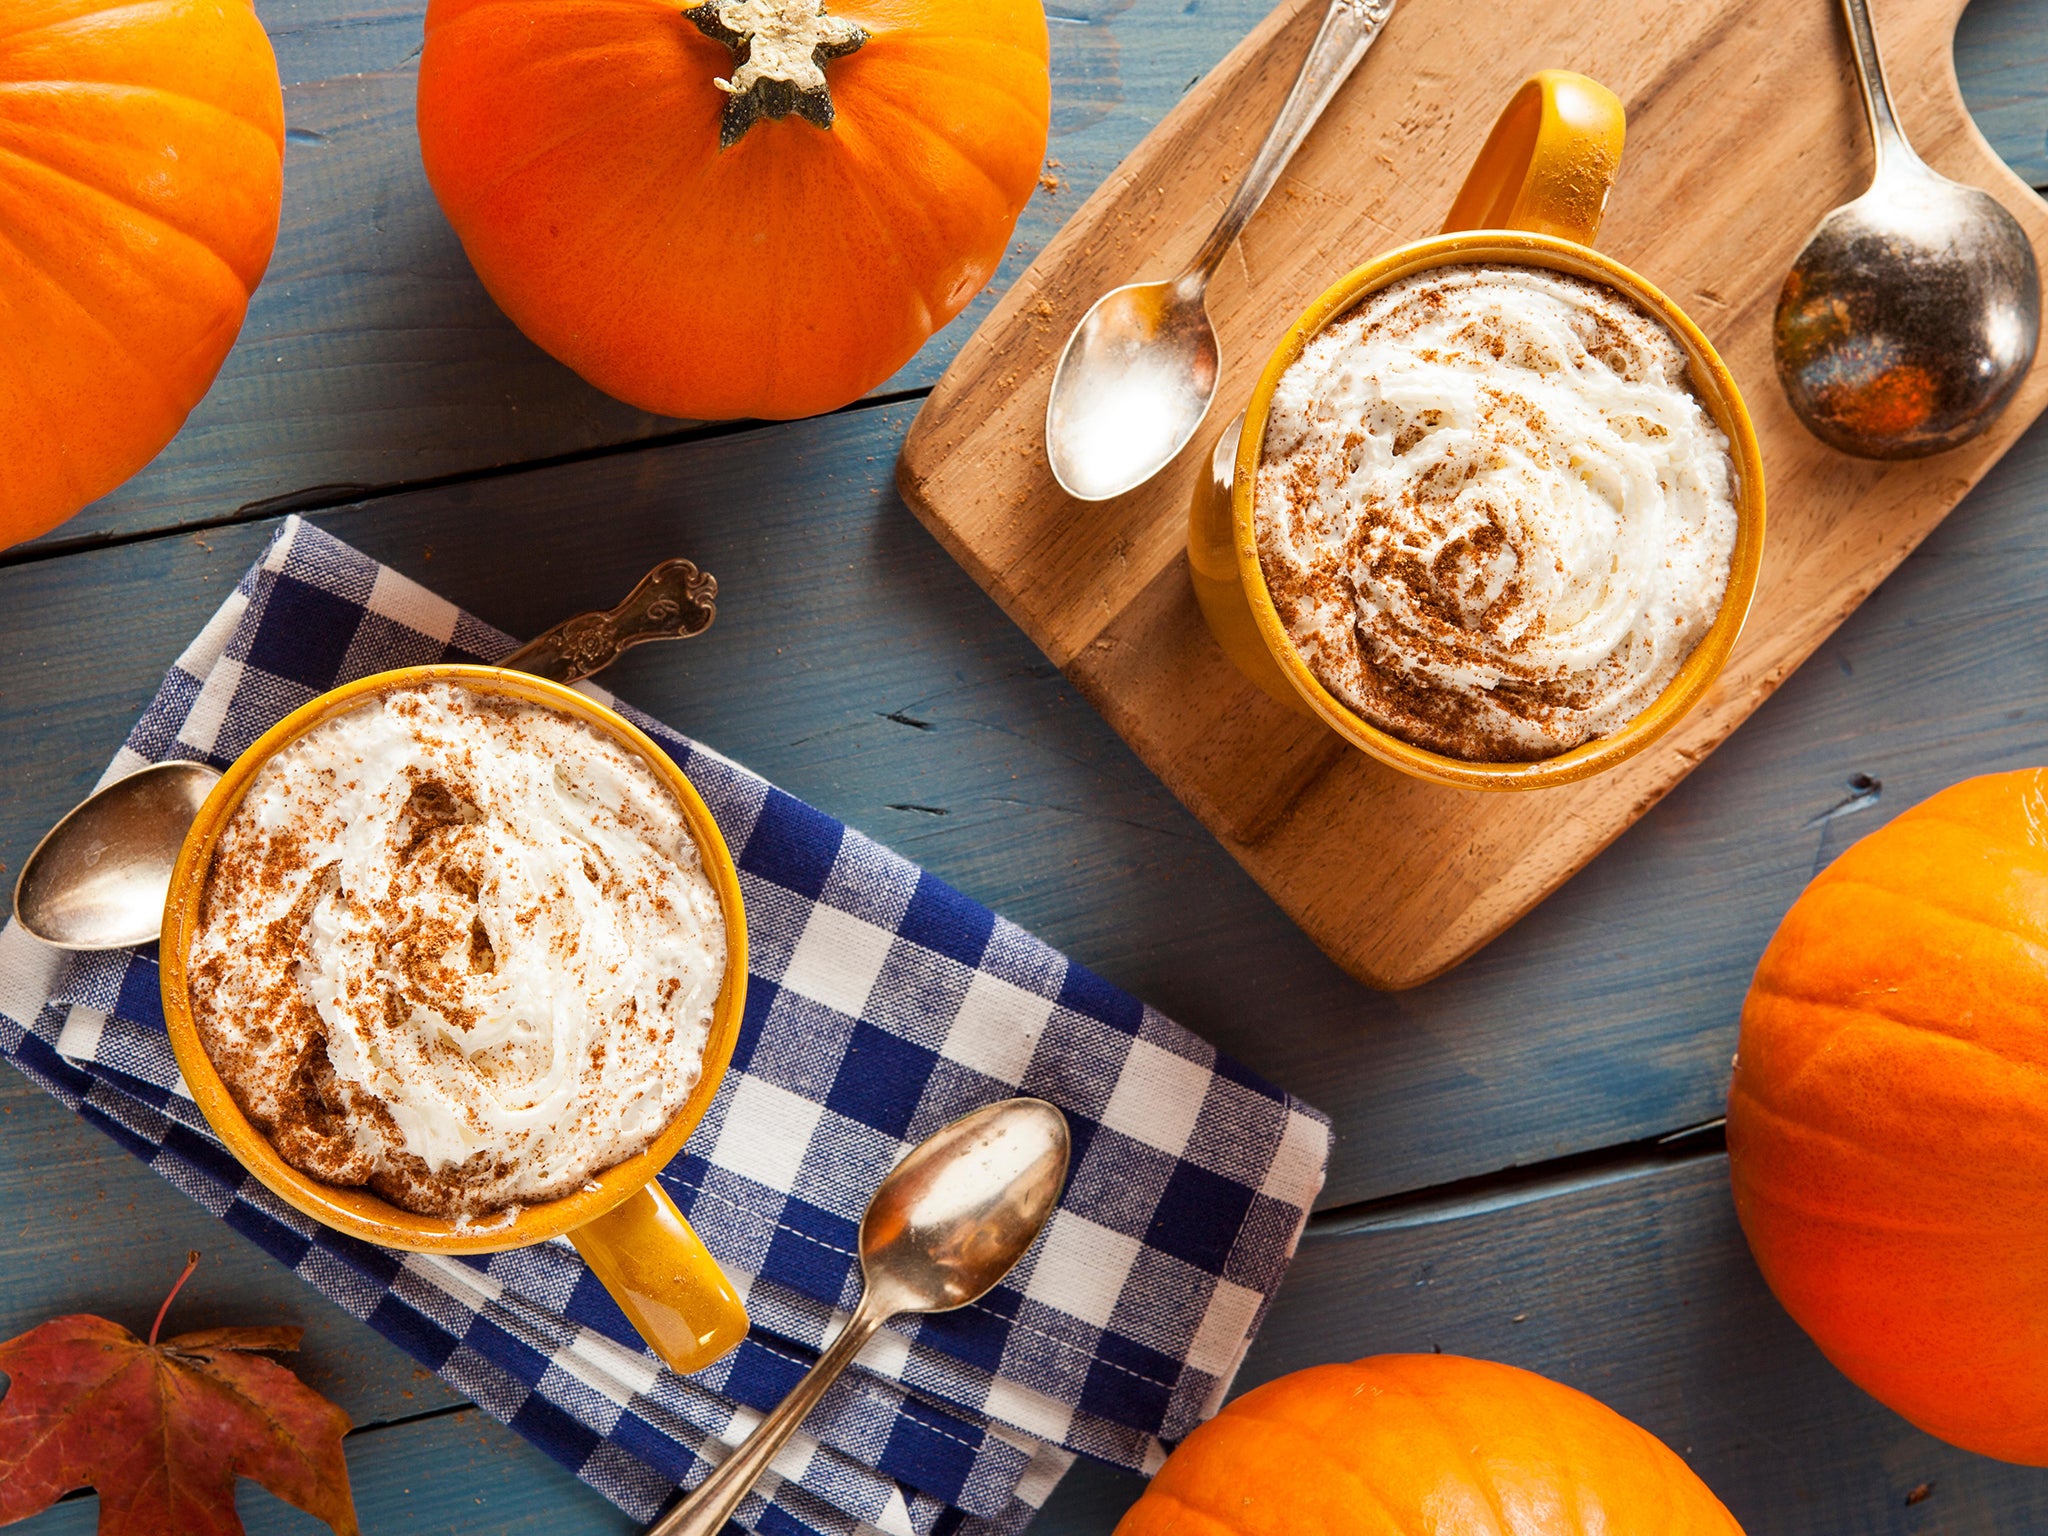 Hug in a mug or flavour fad? The pumpkin spice latte,
best left to those with a sweet tooth